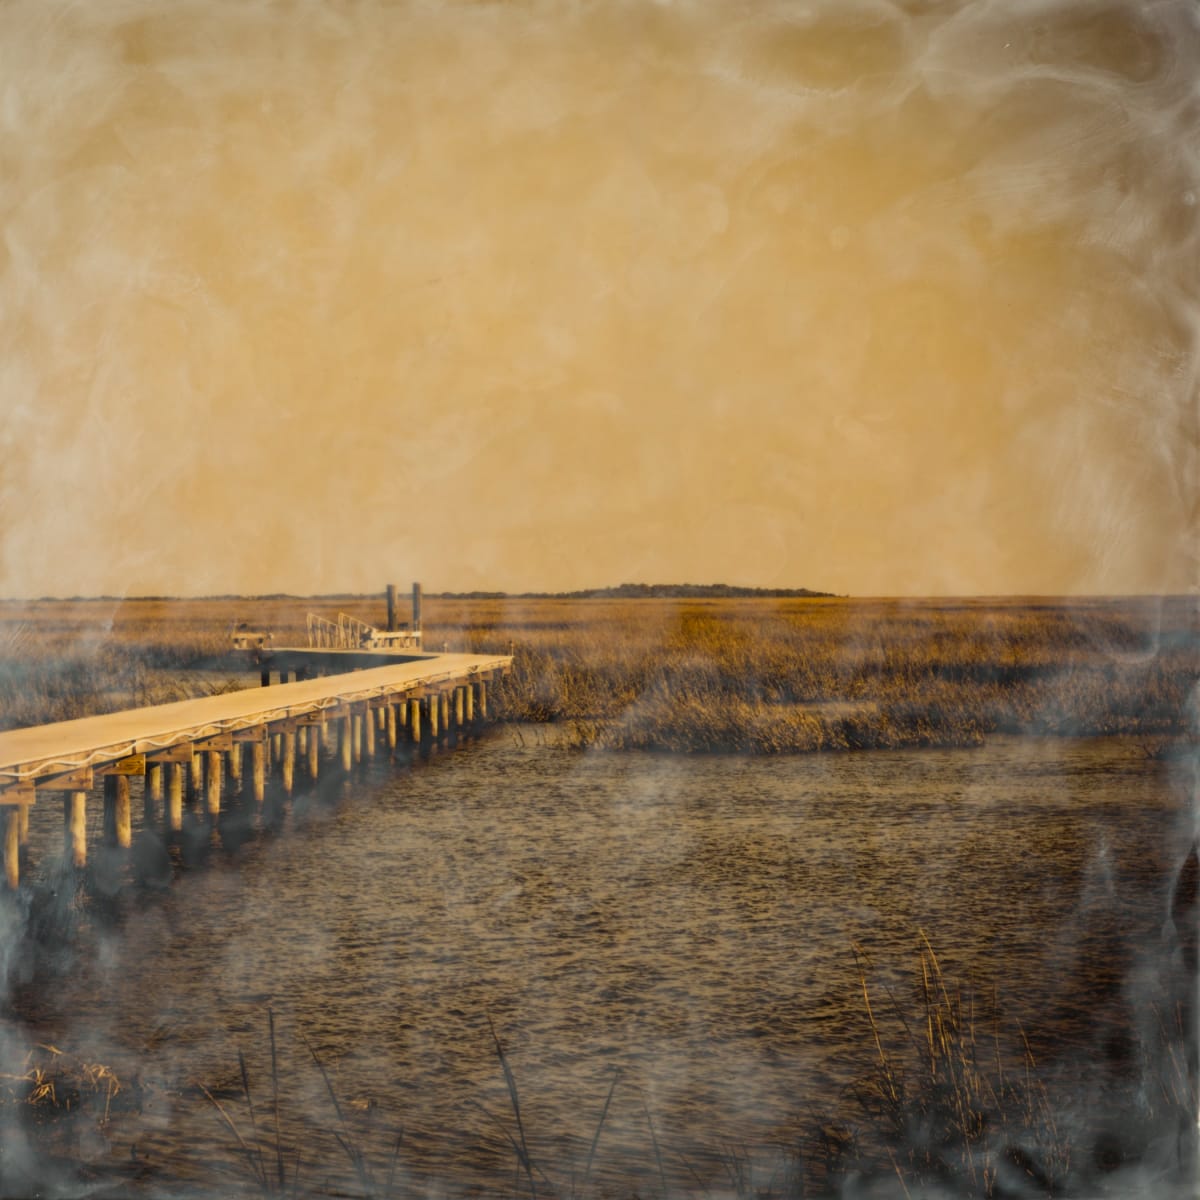 Thoughts Adrift by Deborah Llewellyn  Image: Thoughts Adrift with a natural colored frame